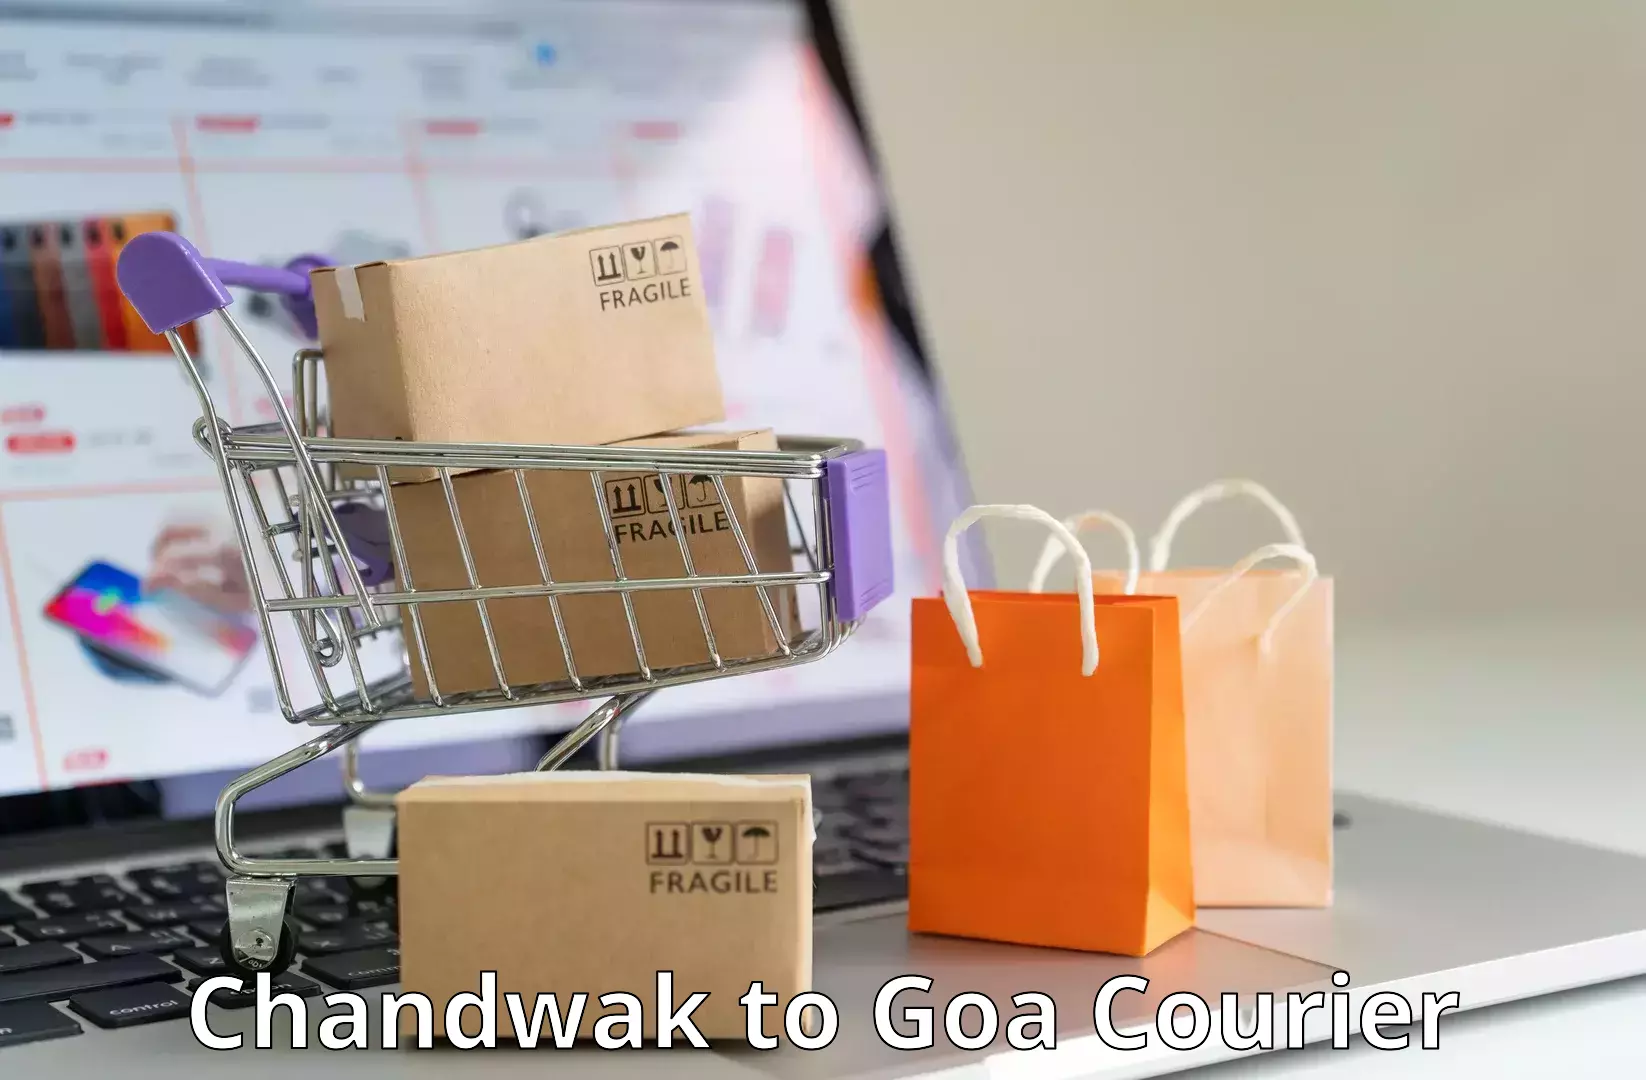 Easy access courier services Chandwak to Ponda